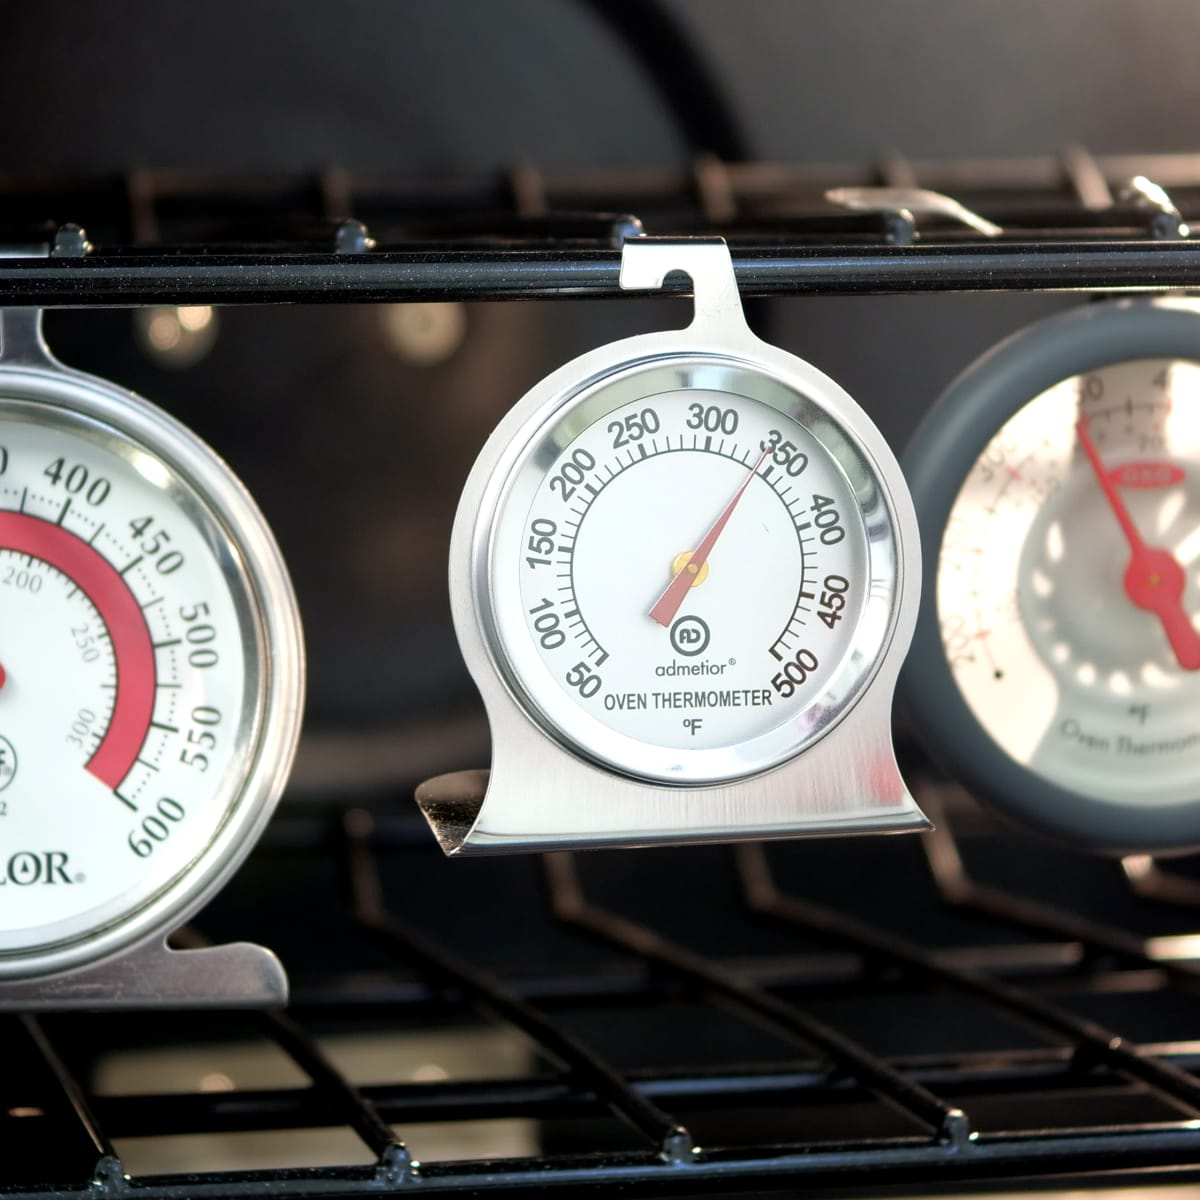 The Best Oven Thermometers Of 2019 Reviewed Ovens